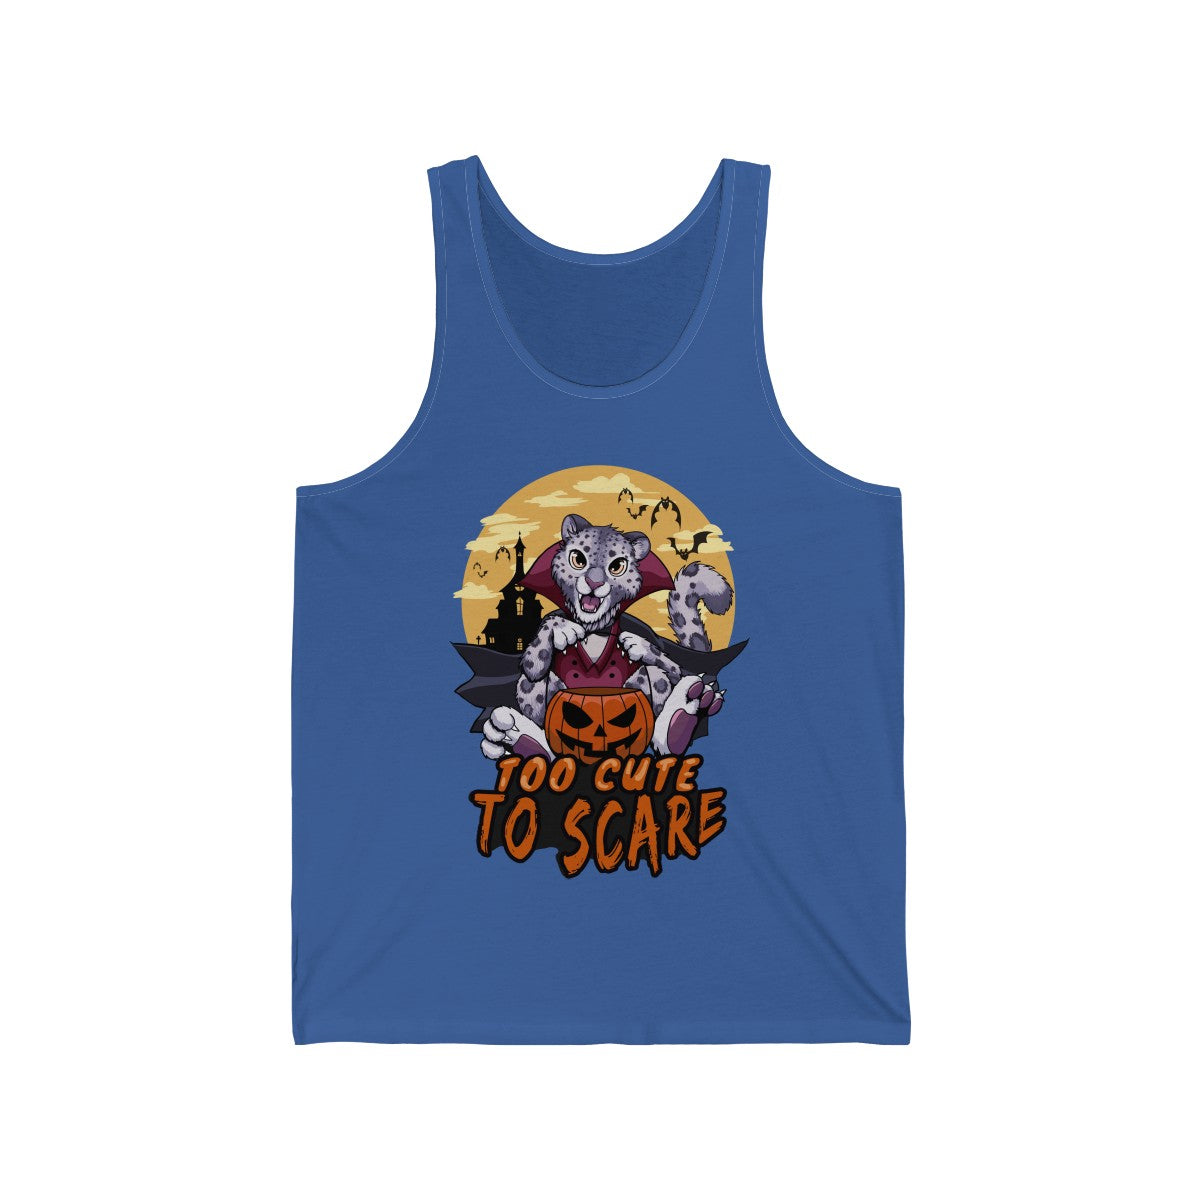 Too Cute to Scare - Tank Top Tank Top Artworktee Royal Blue XS 